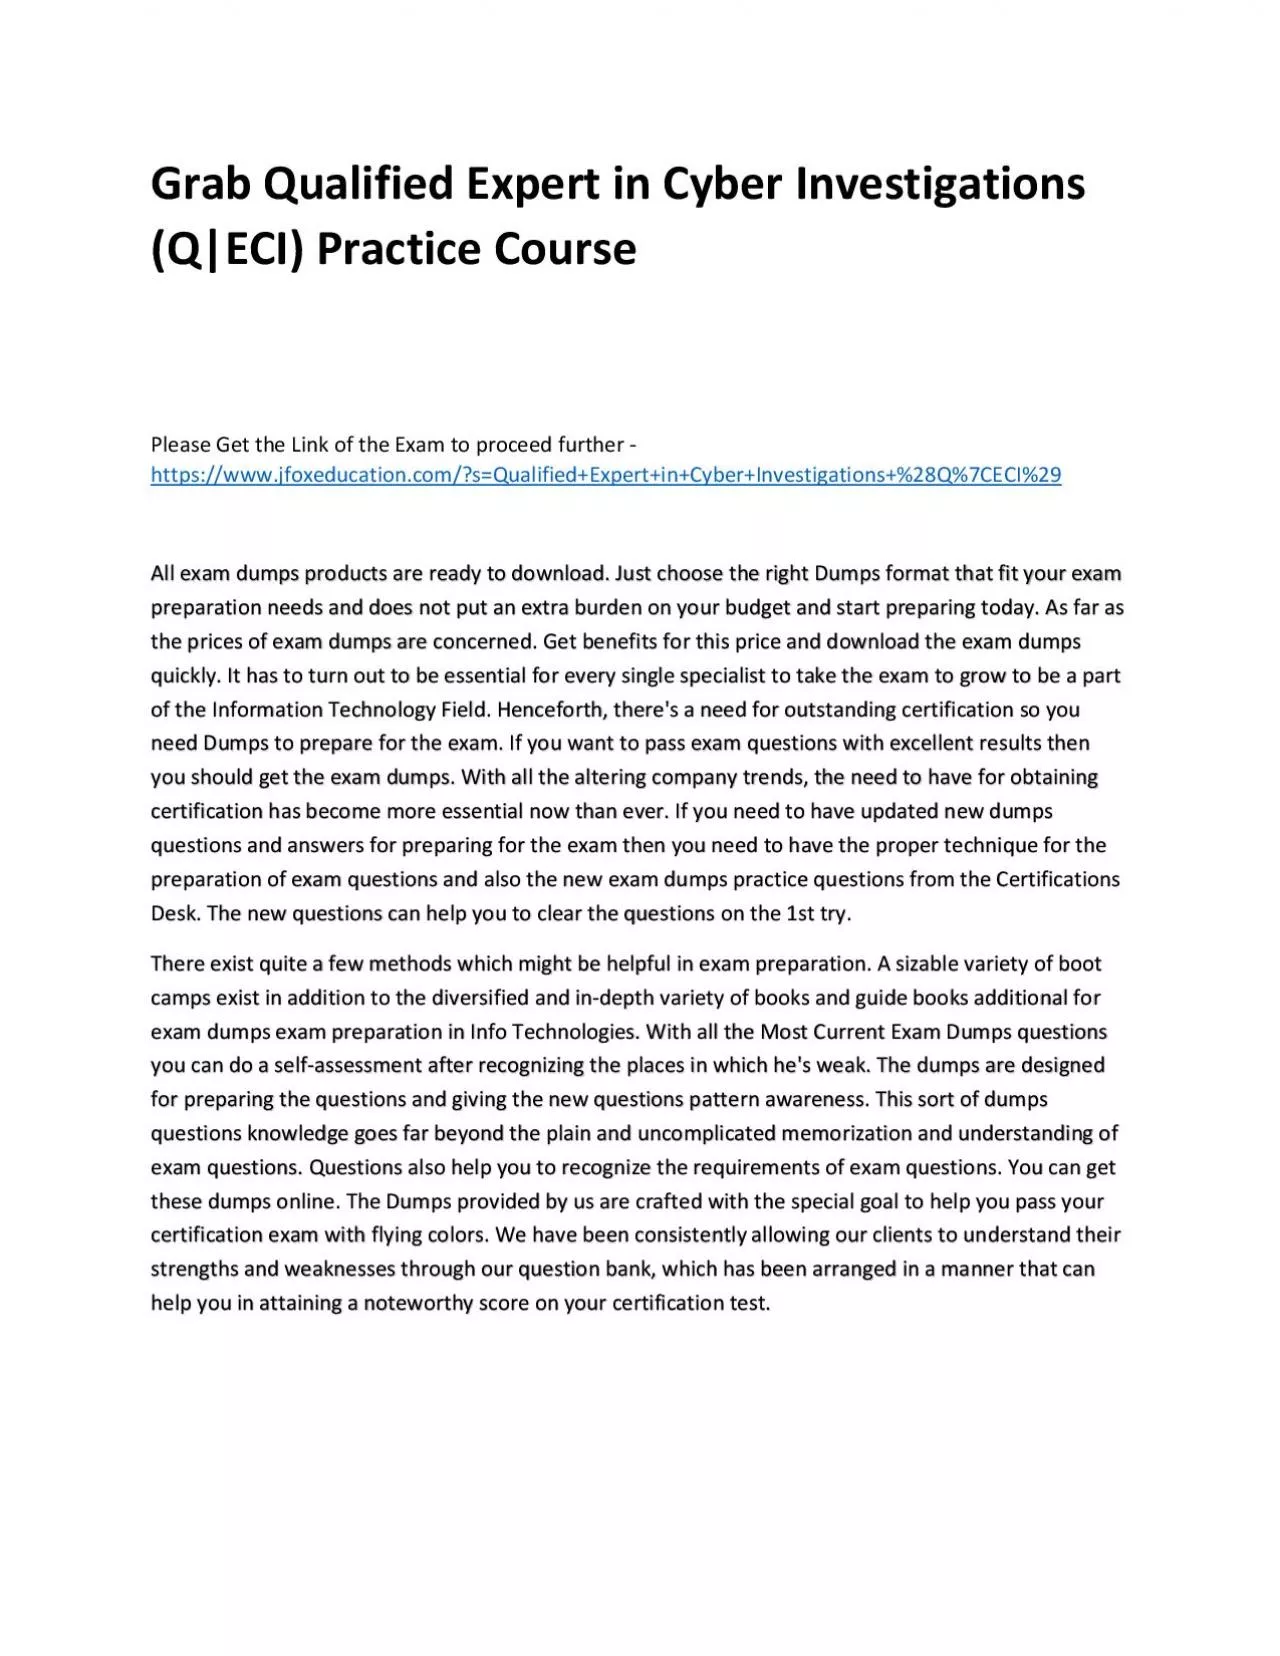 Grab Qualified Expert in Cyber Investigations (Q|ECI) Practice Course